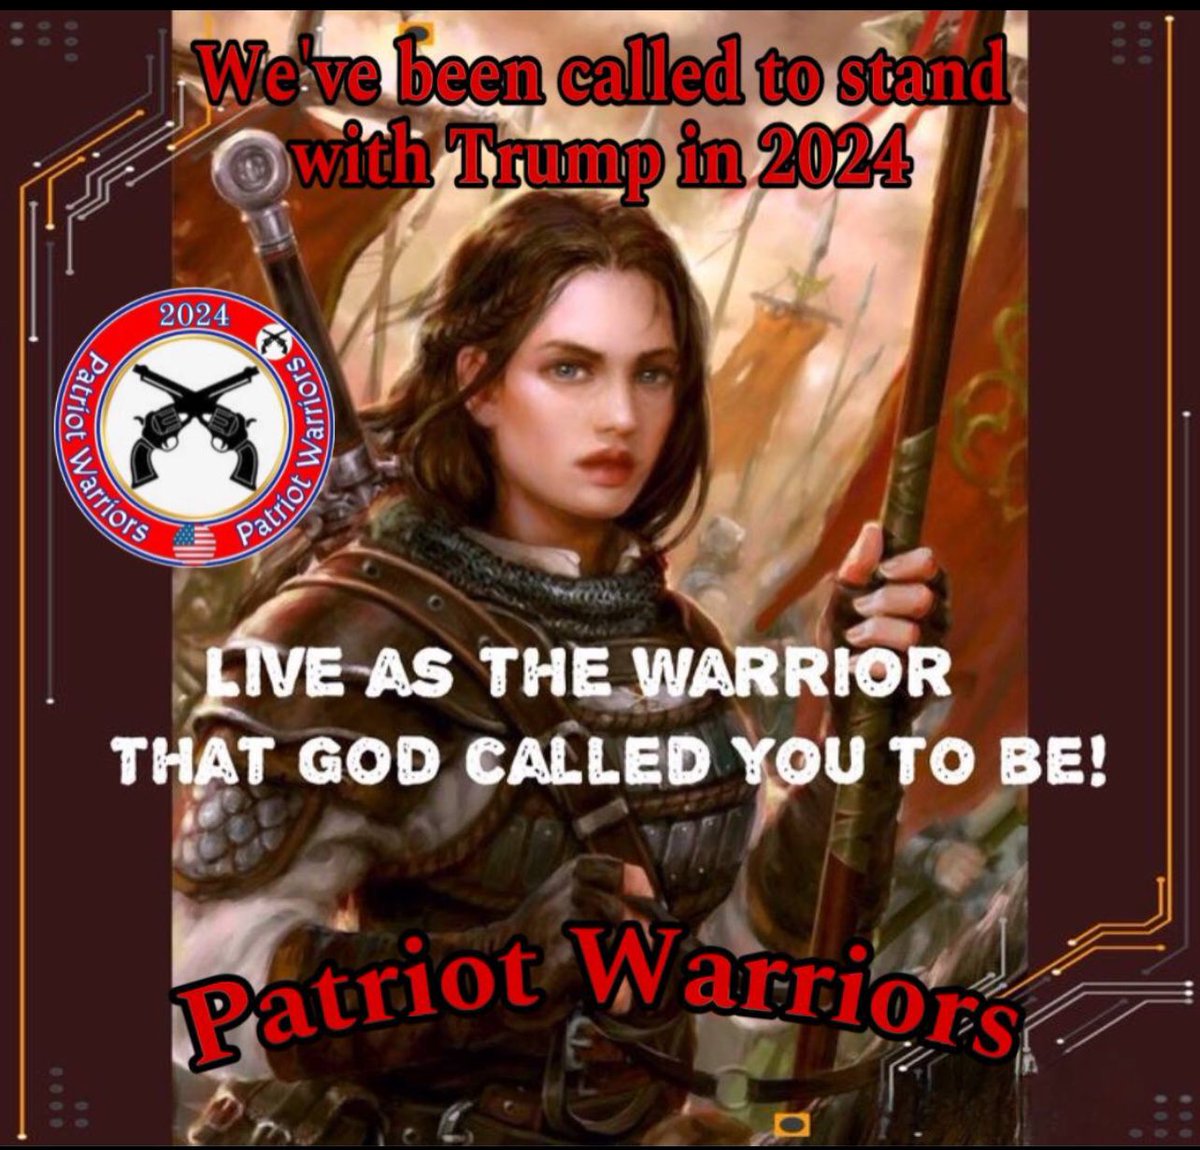 🚨 BOOMER 🚂 228 🚨 🇺🇸🇺🇸 We stand with TRUMP for fighting for our Religious Freedom and Standing for Life. 🇺🇸🇺🇸 @Yorkshirecath @MagaPatriotHM @Jothedeplorable @RAGINxCAJUN @Gentleman2741 @ZollmanBBecker @PURE_BL00D2 @Ilegvm @bdonesem @Sir_Charlsss @sallykycheer